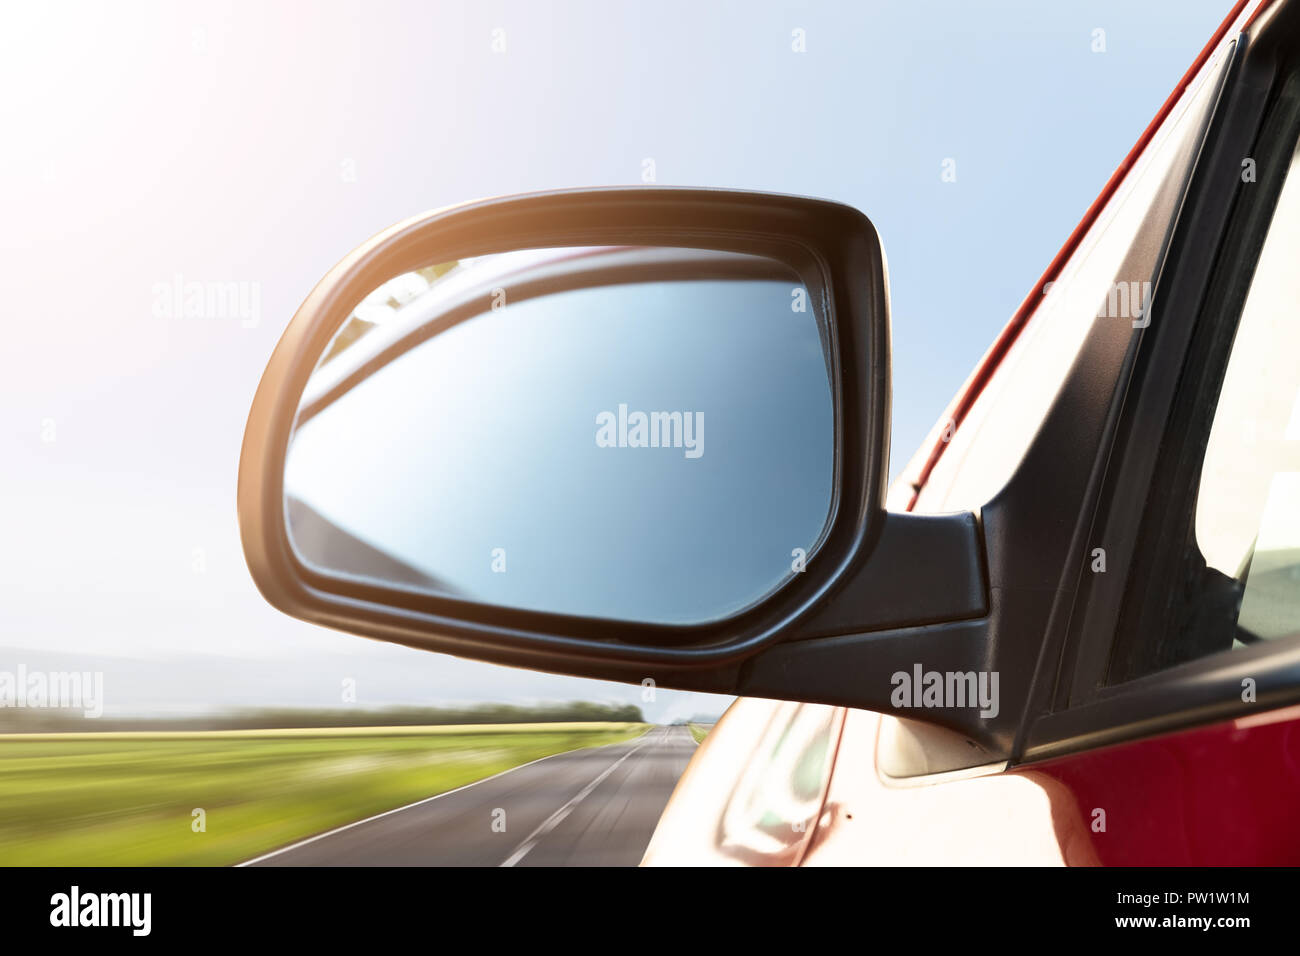 Rear View Mirror Of A Car Driving On Street Stock Photo